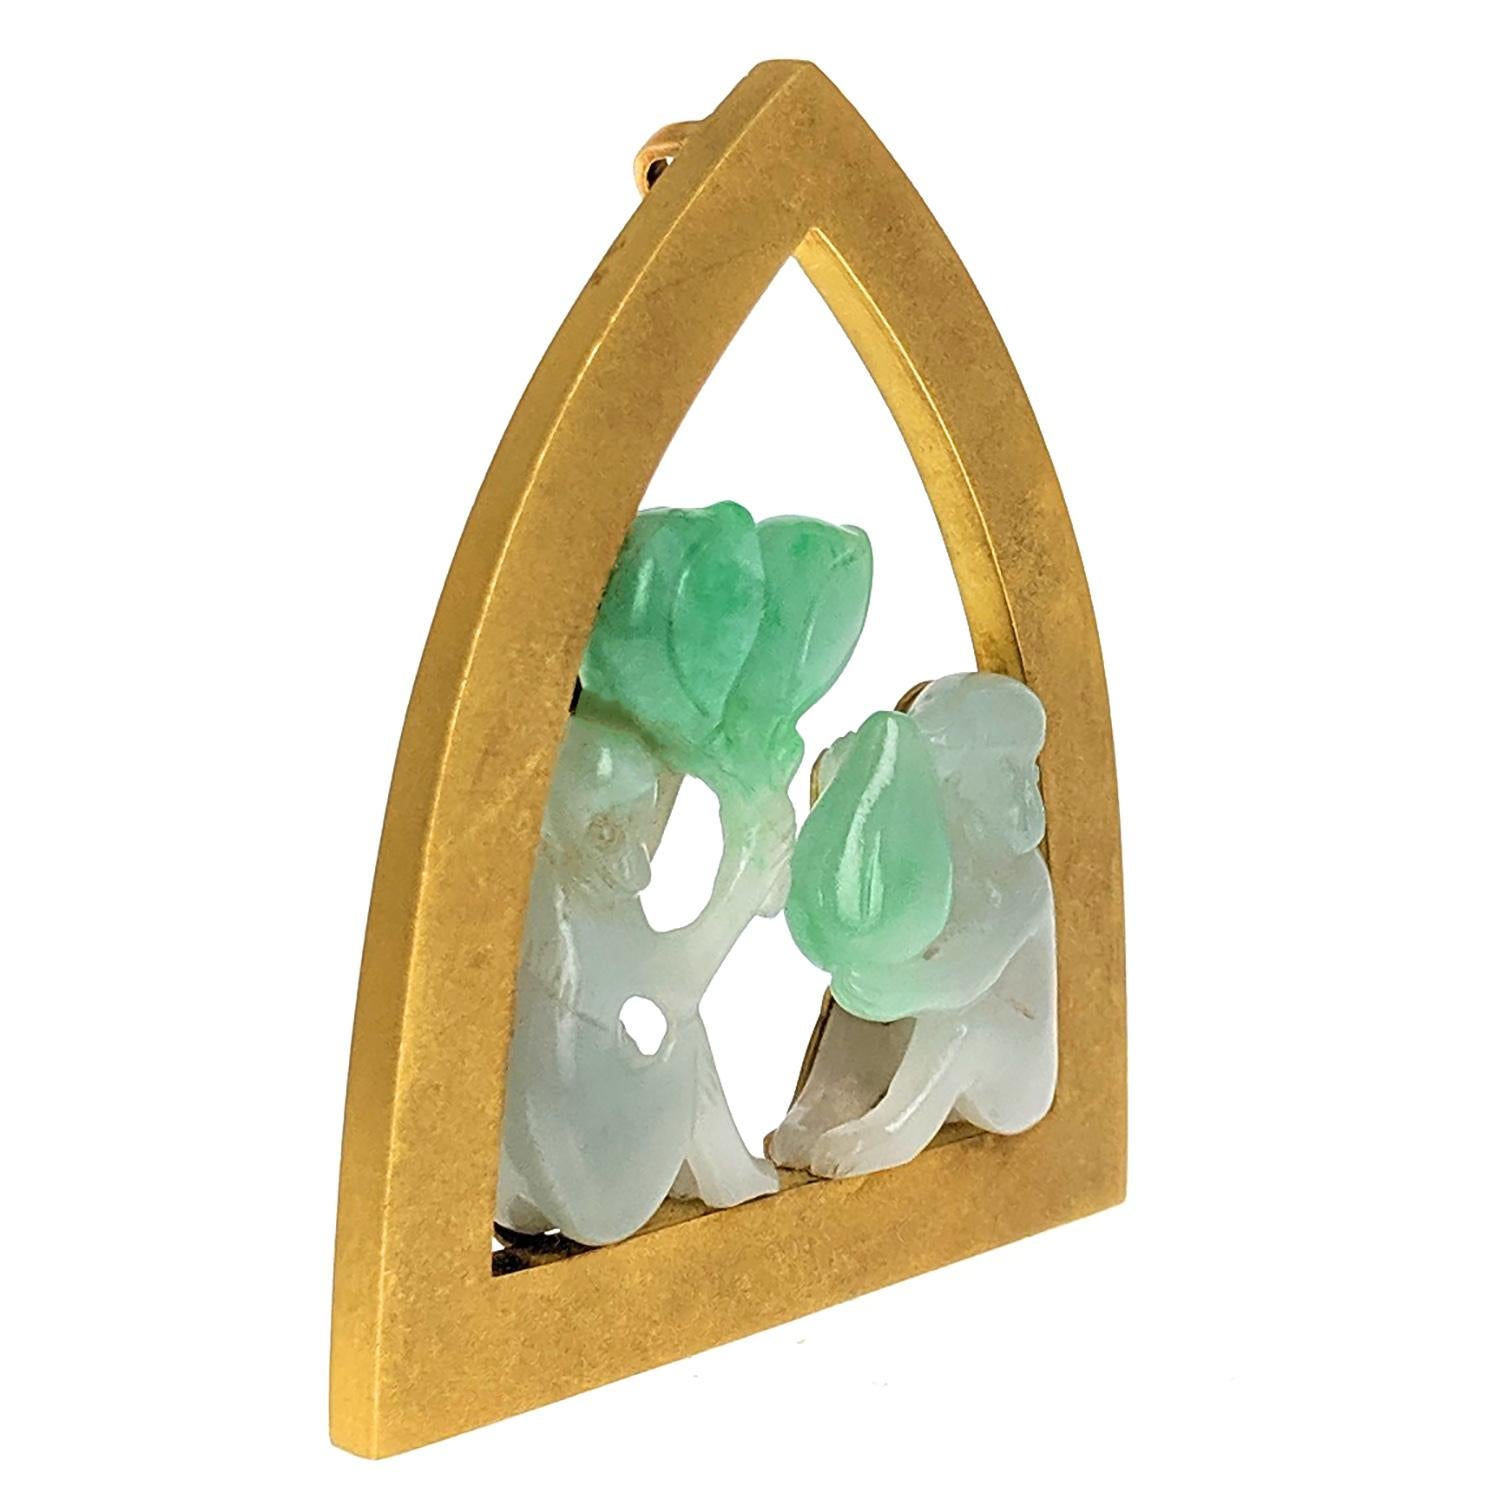 Of openwork design, comprising two carved green jadeite monkeys holding palm leaves, sitting on the ledge of a  brushed gold arch-shaped window, mounted in 18k yellow gold, signed Grima, with maker’s mark AGLtd for Andrew Grima, with London Assay